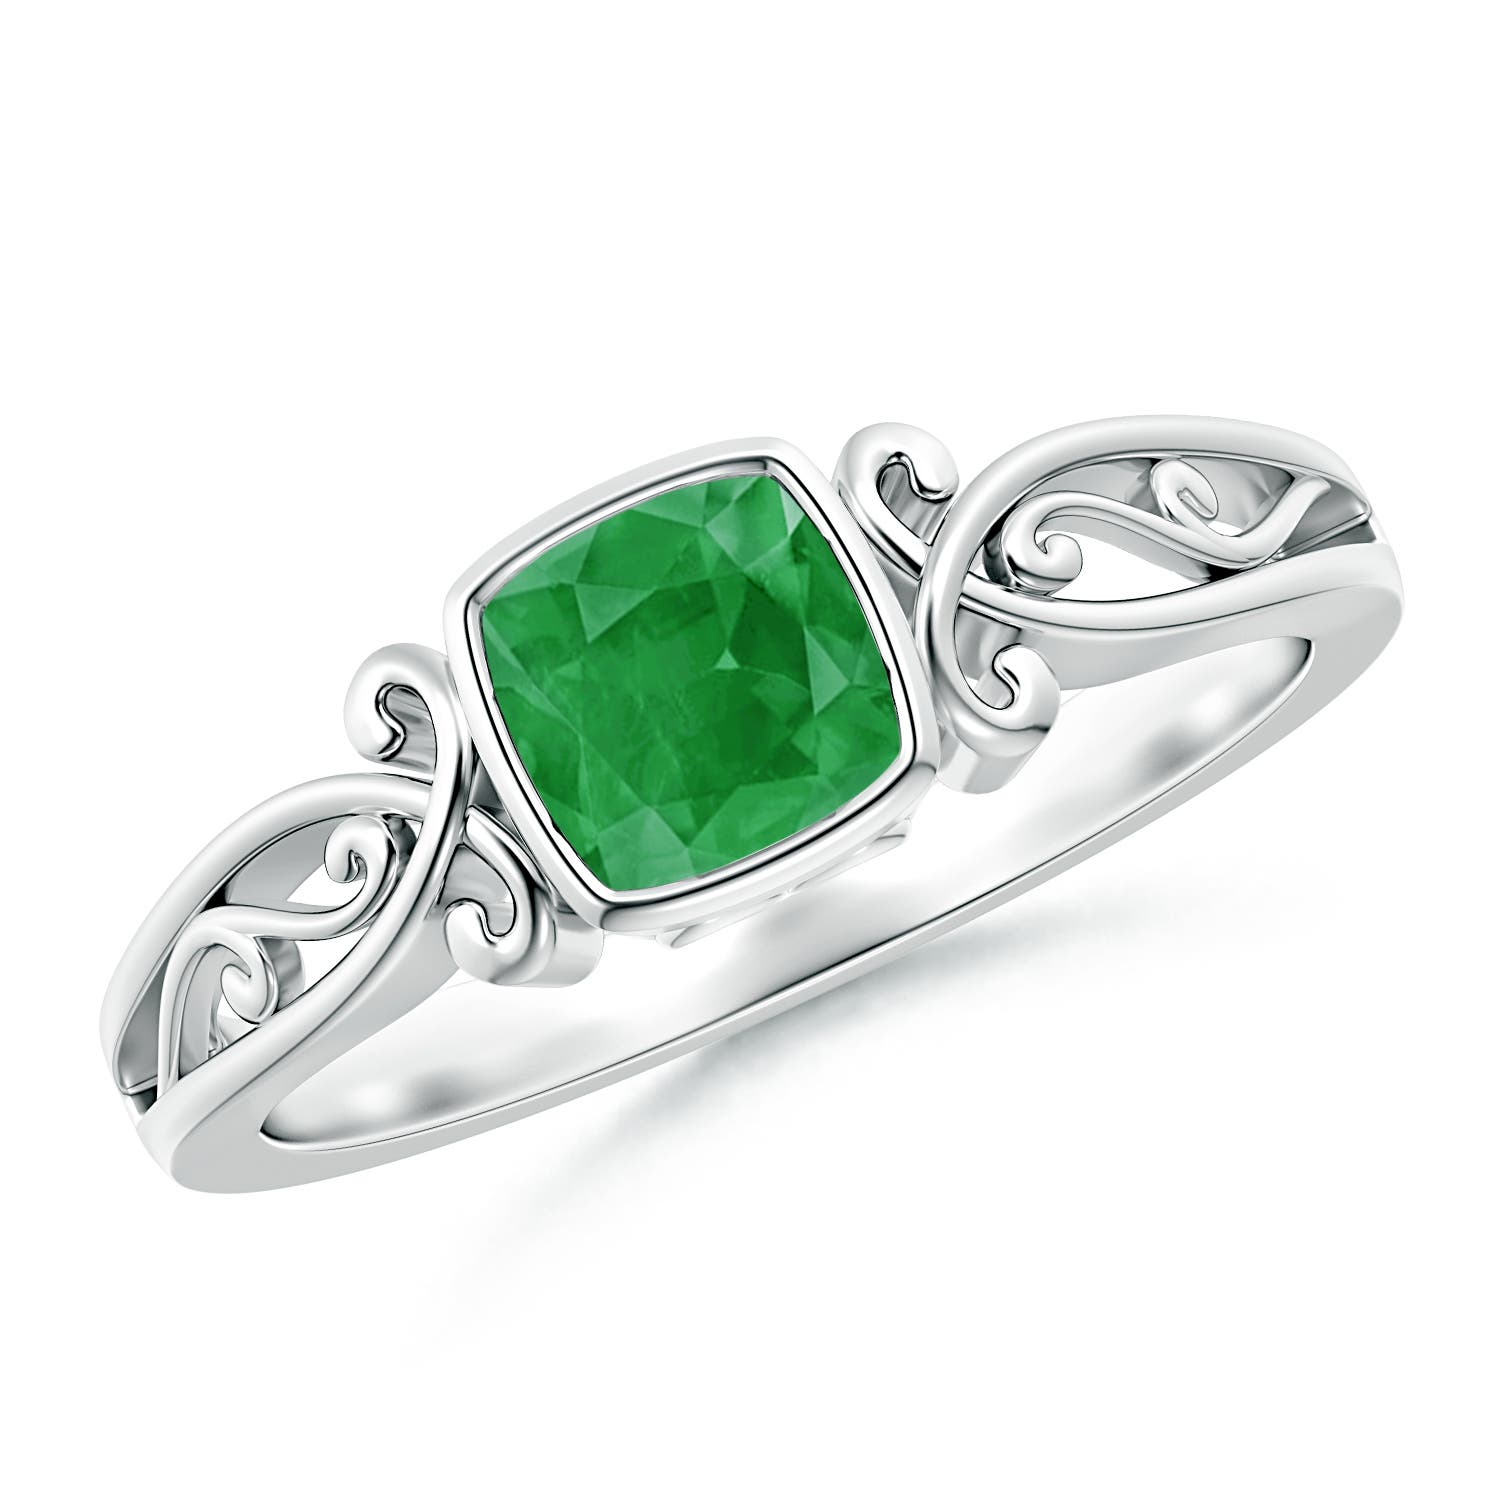 A - Emerald / 0.55 CT / 14 KT White Gold